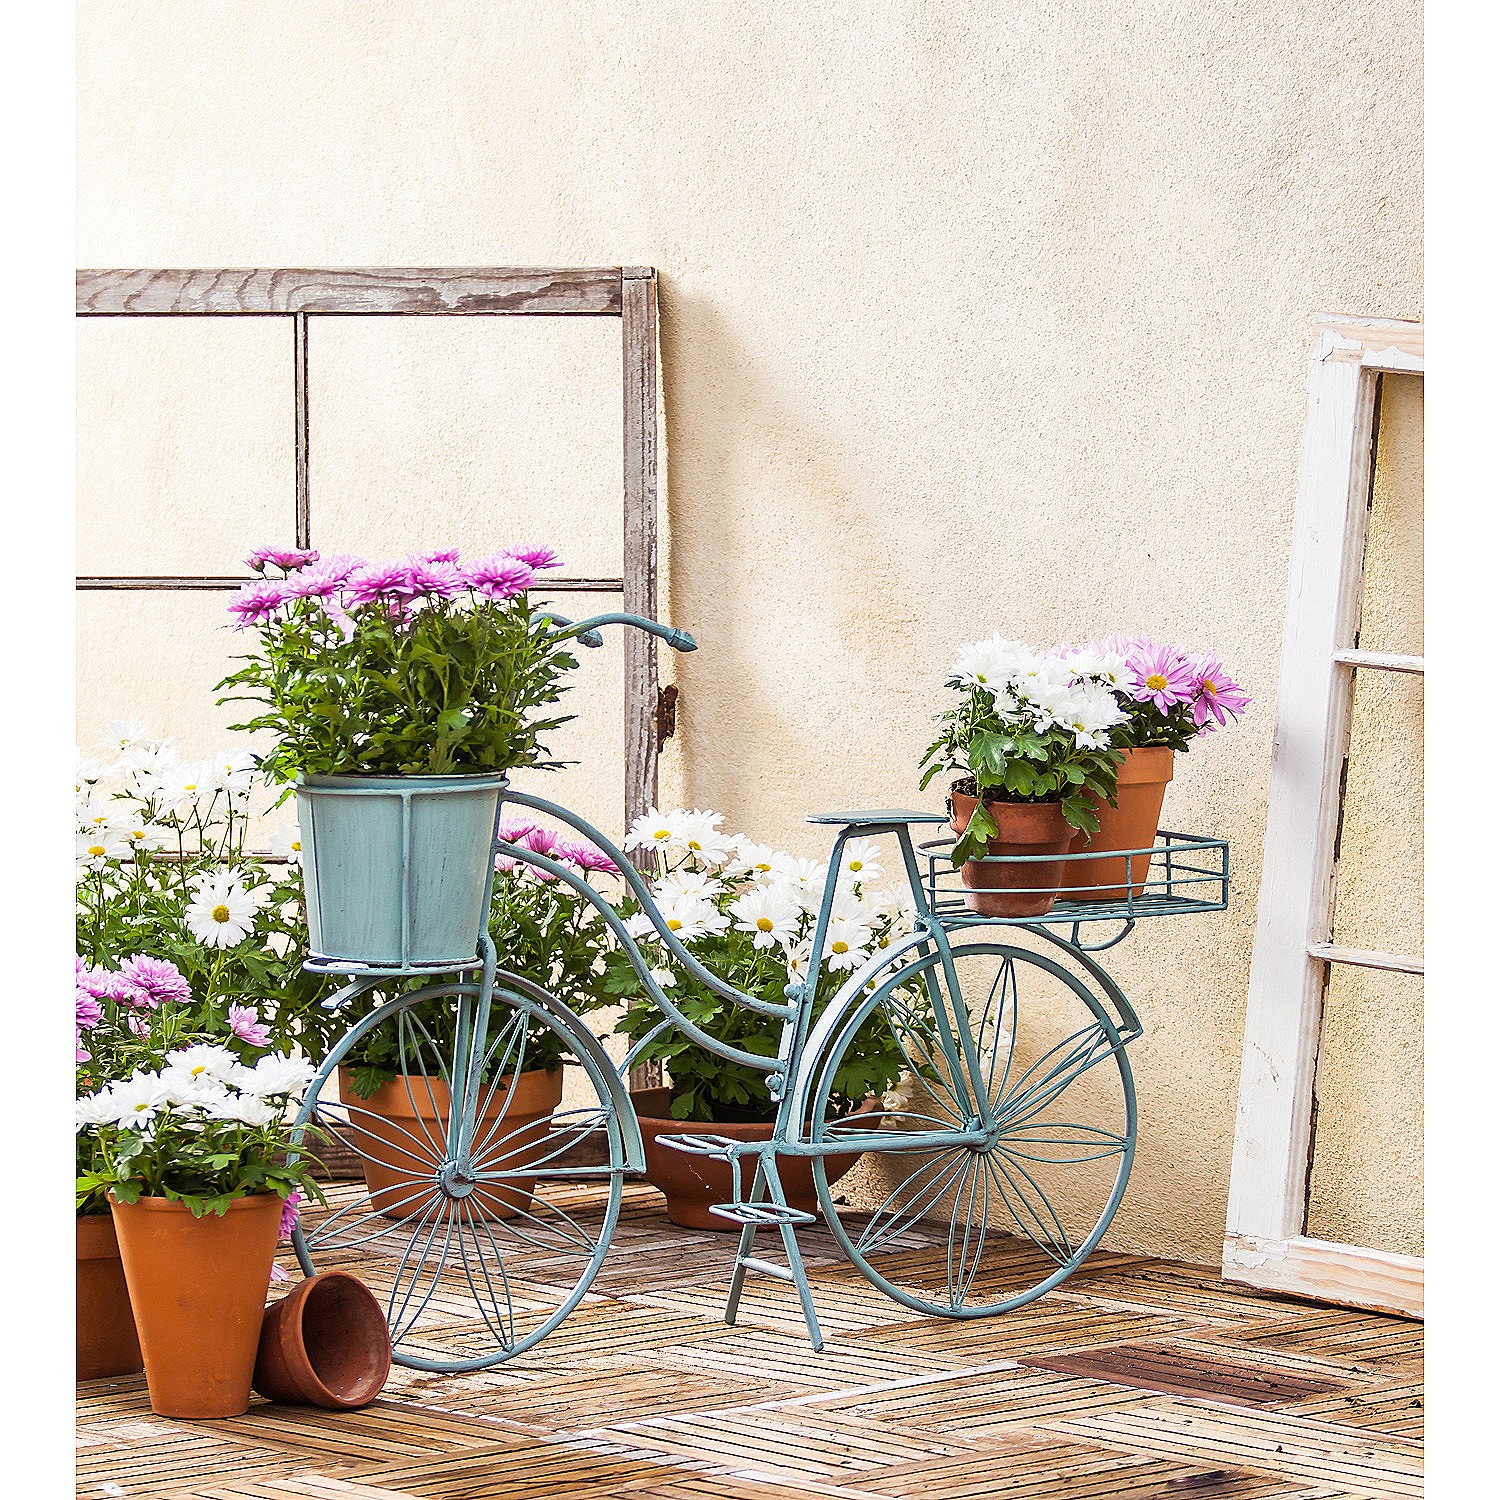 Evergreen Vintage Teal Bicycle Planter Outdoor Safe Decor - image 2 of 5